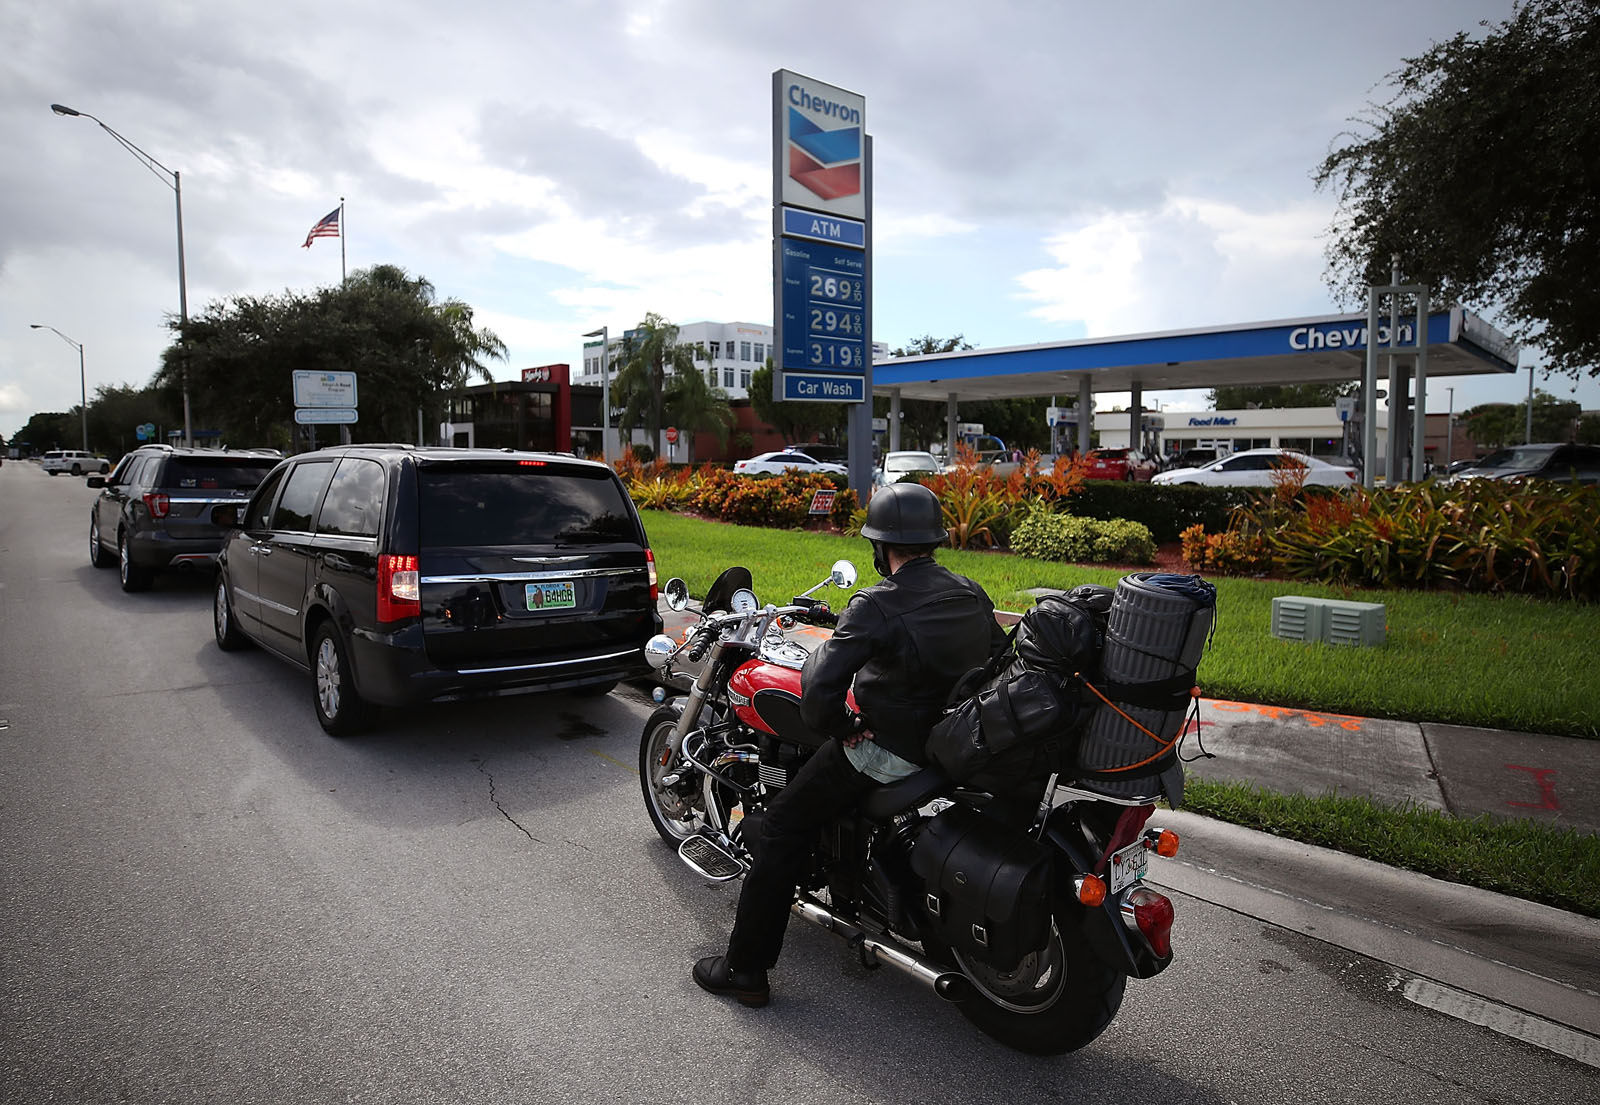 A motorcyclist waits in long gas line as people prepare for Hurricane Irma on Sept. 6, 2017 in Doral, Florida. It's still too early to know where the direct impact of the hurricane will take place but the state of Florida is in the area of possible landfall.   (Photo by Mark Wilson/Getty Images)